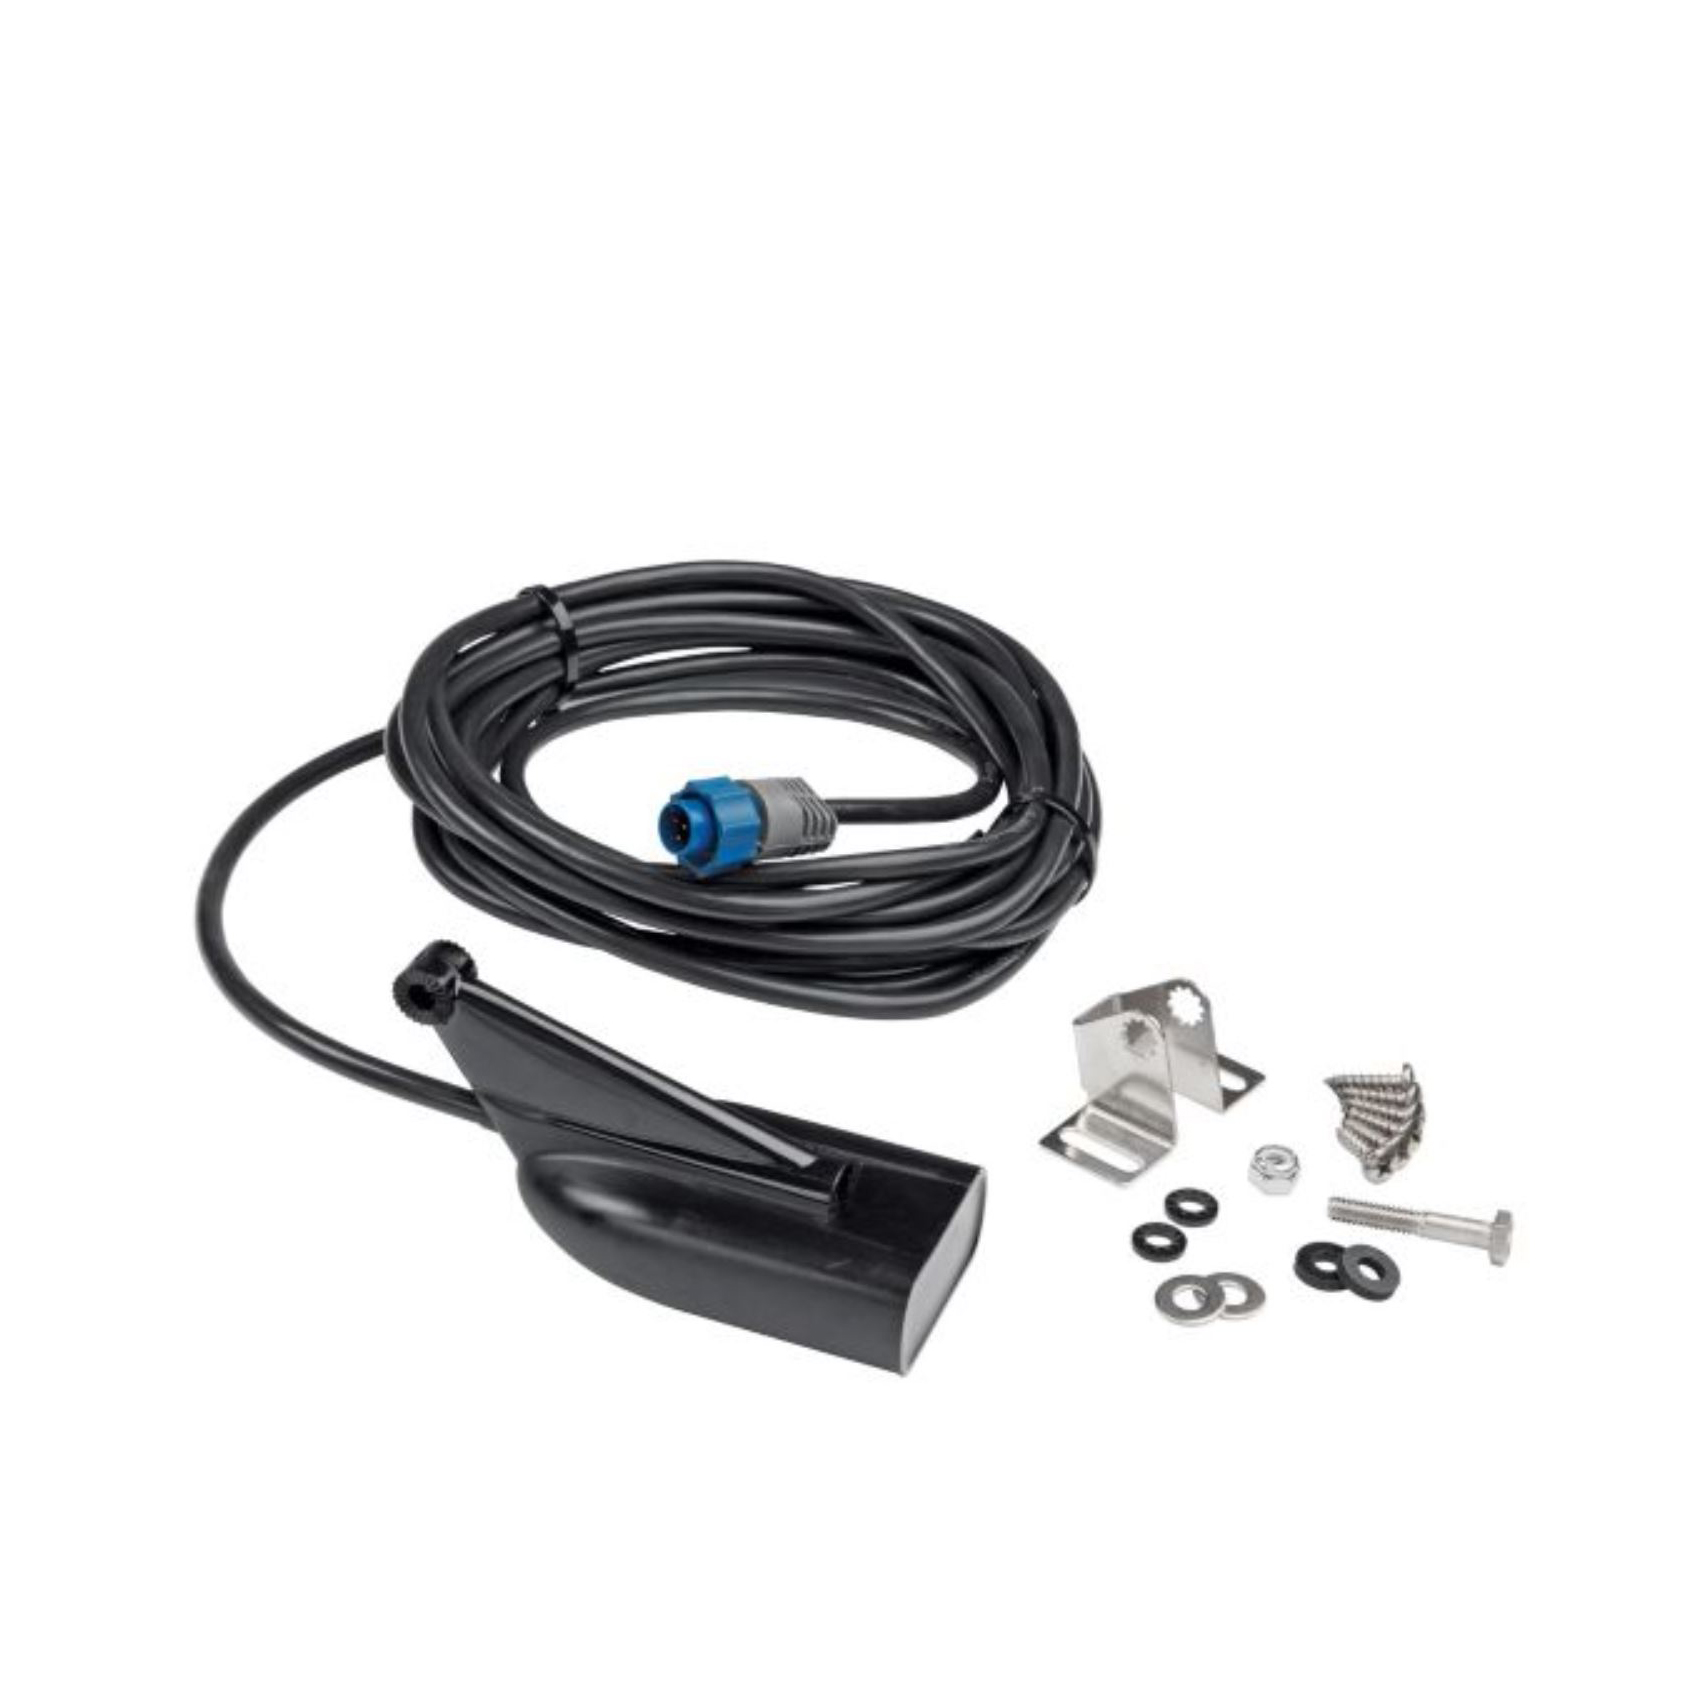 Lowrance HDI Skimmer Transducer (000-10976-001) at GPS Central Canada